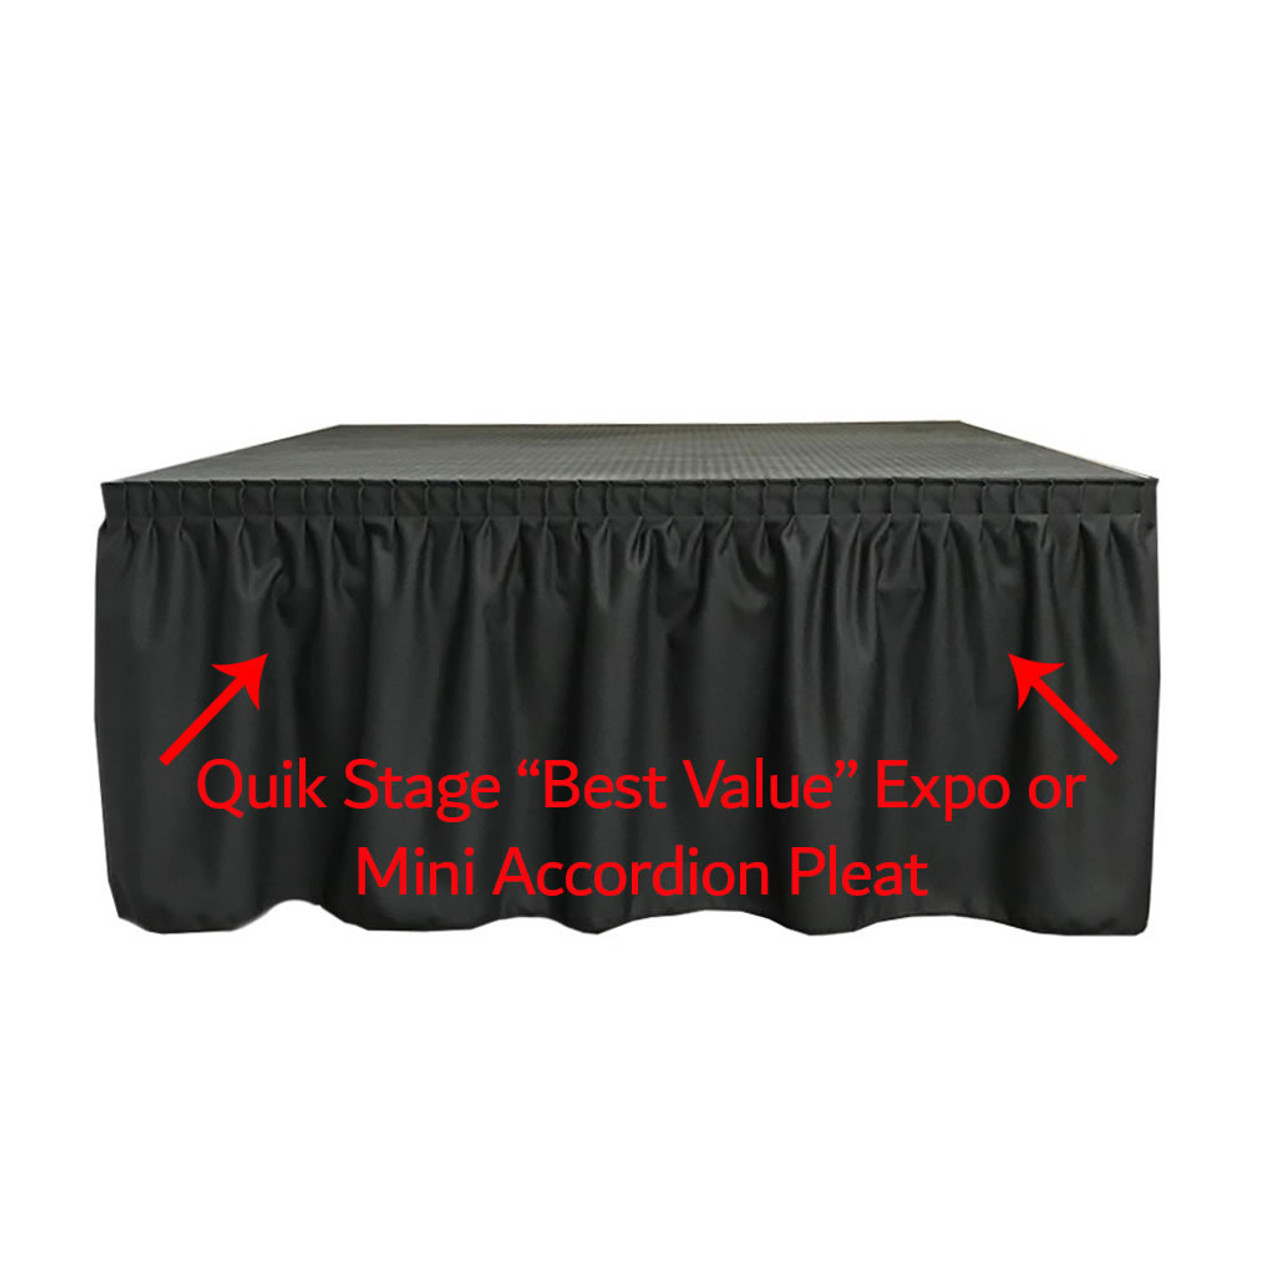 High Quality Quik Stage 12' x 32' High Portable Stage Package with Black Polyvinyl Non-Skid Surface. Additional Heights and Surfaces Available - Best Value Expo Pleat Stage Skirting